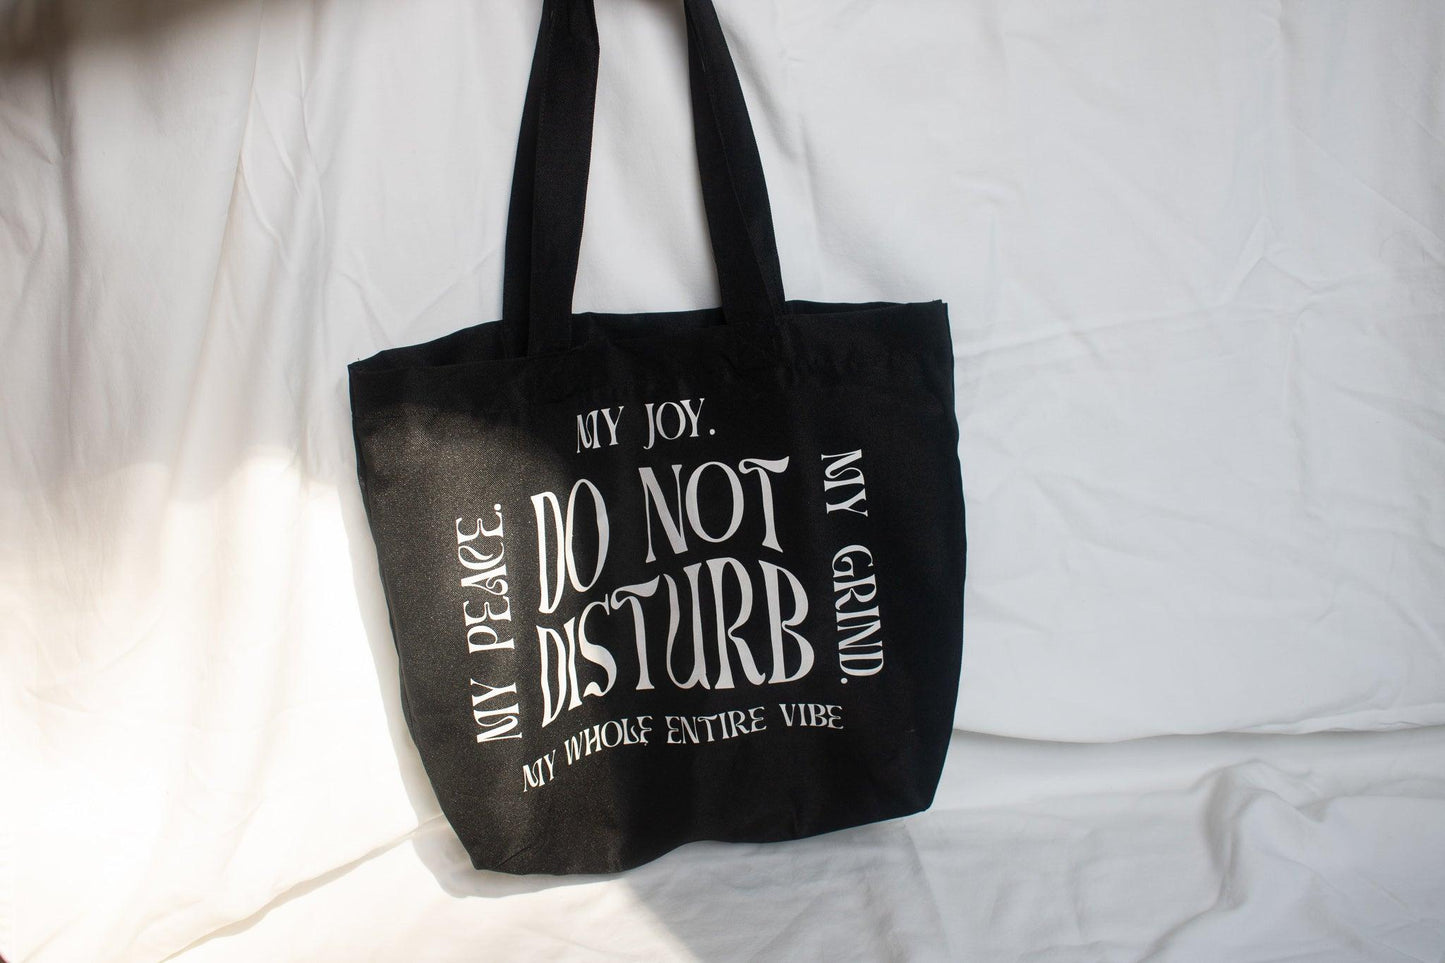 A photo of a hanging black tote bag against a white background that has do not disturb in the middle. Along the sides going clockwise forming a square is "My Joy. My Grind. M whole entire vibe. My Peace." all in a retro wavy text.